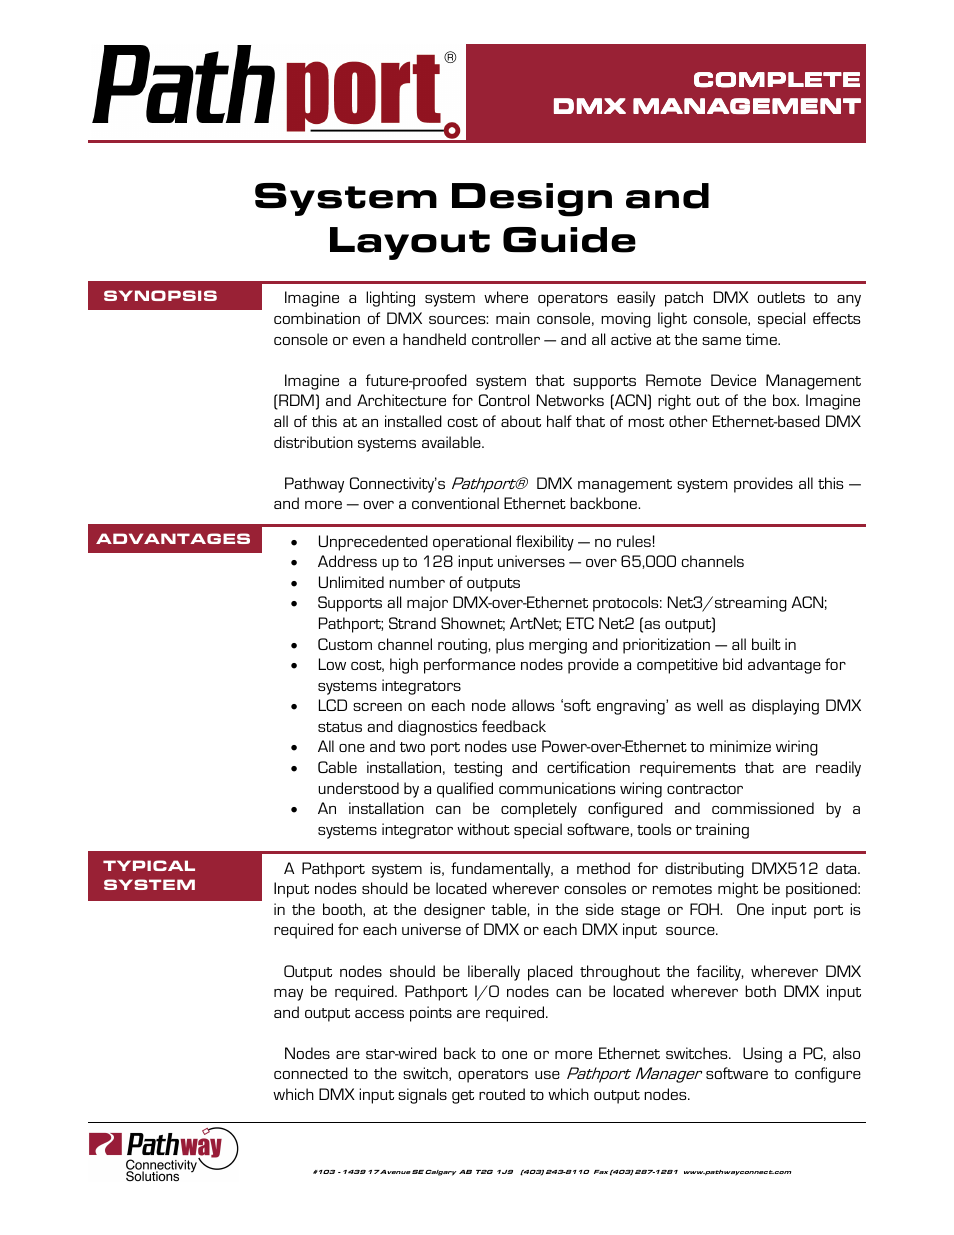 System Design/Layout Guide